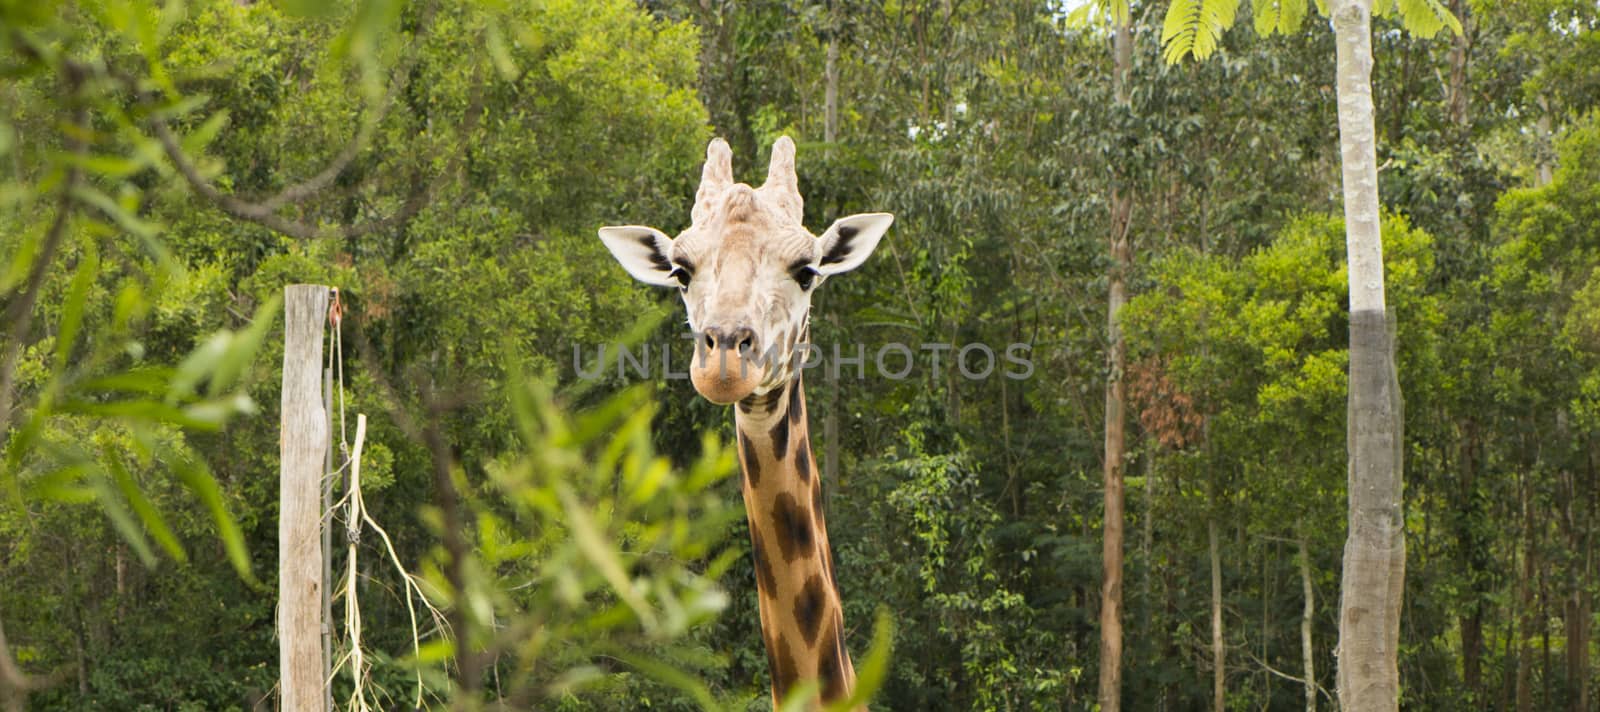 Large giraffe looking for food during the daytime.